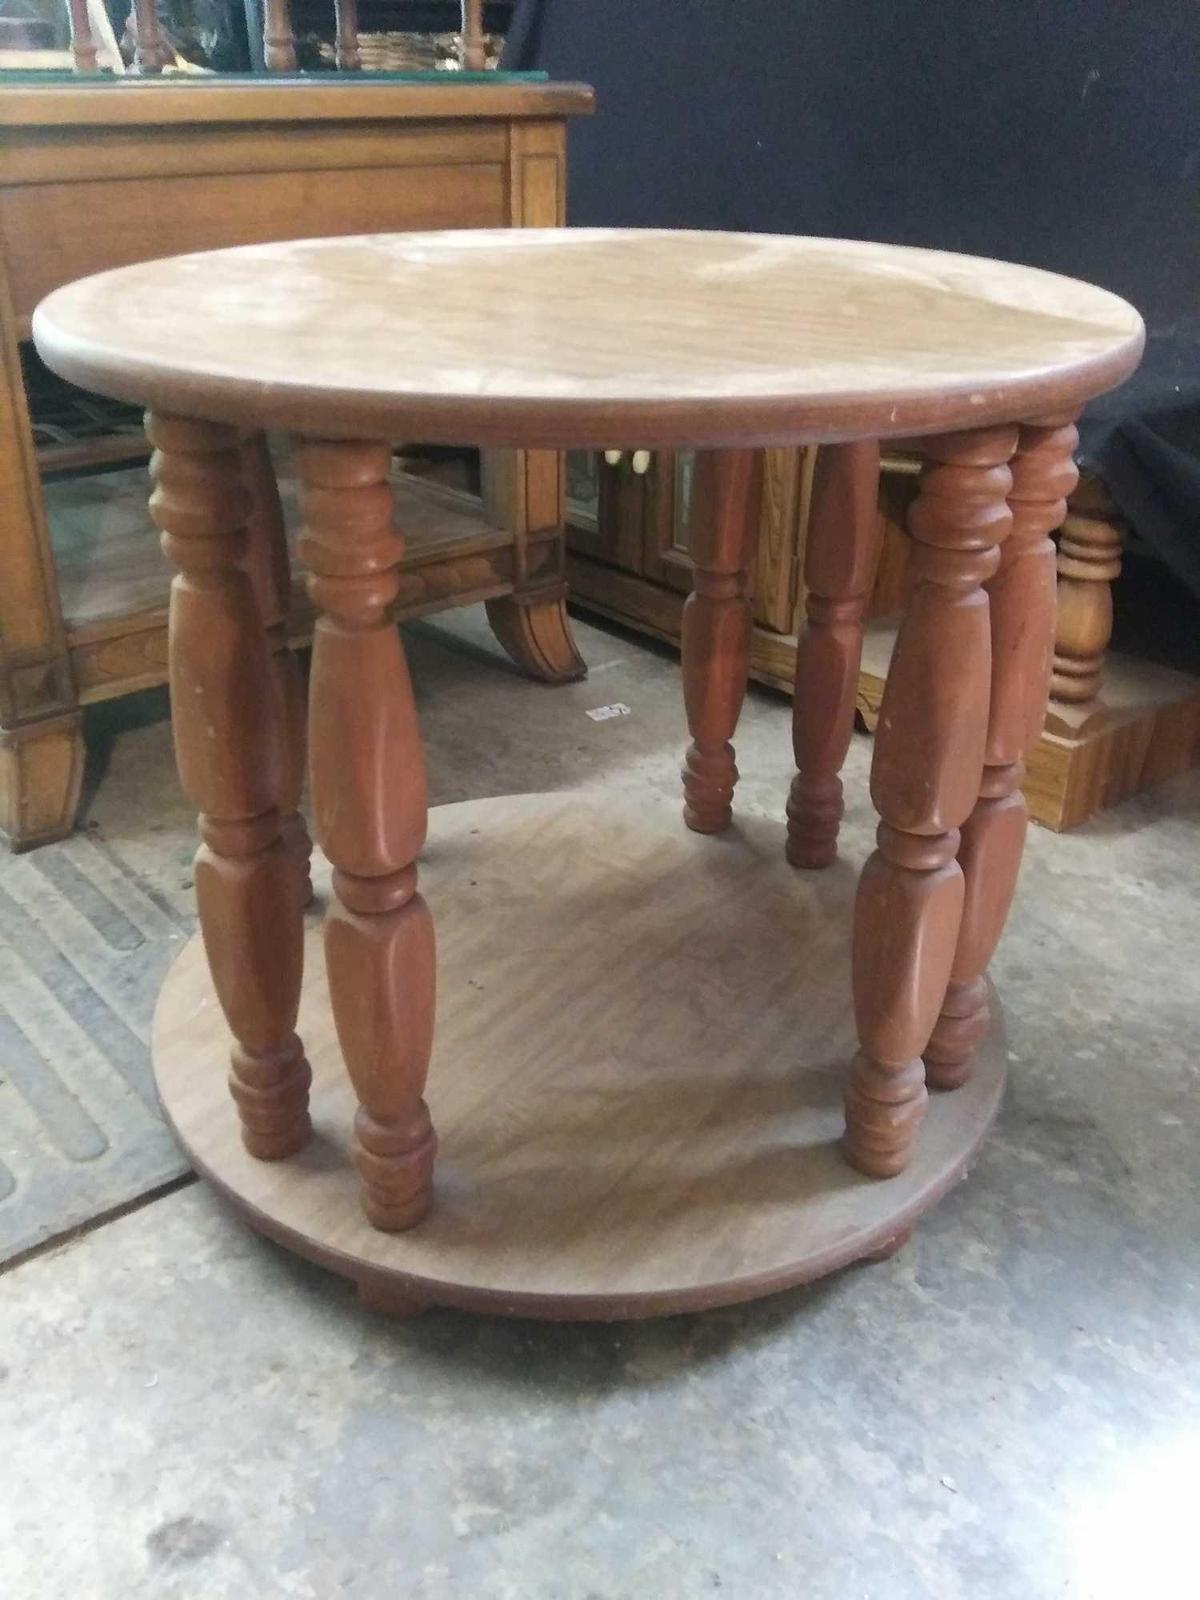 Double level round, 6 spindle support side table